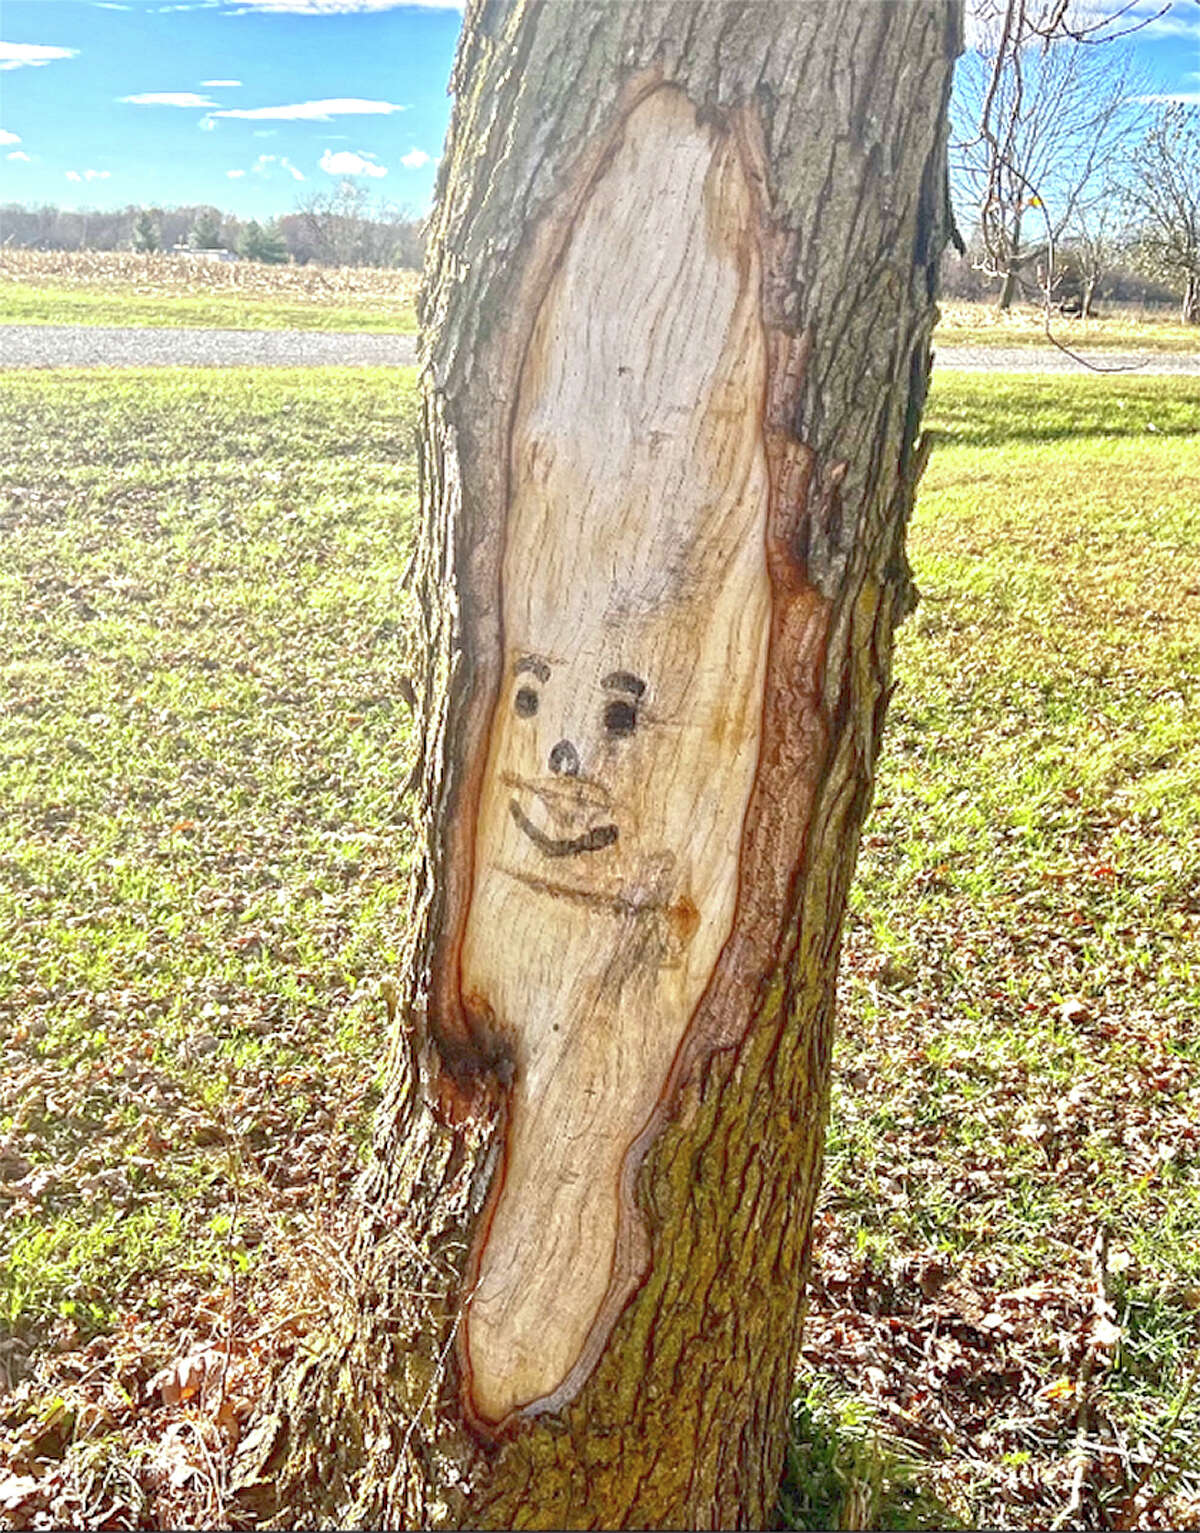 A smiling face adds a little personality to a damaged section of bark on a tree.